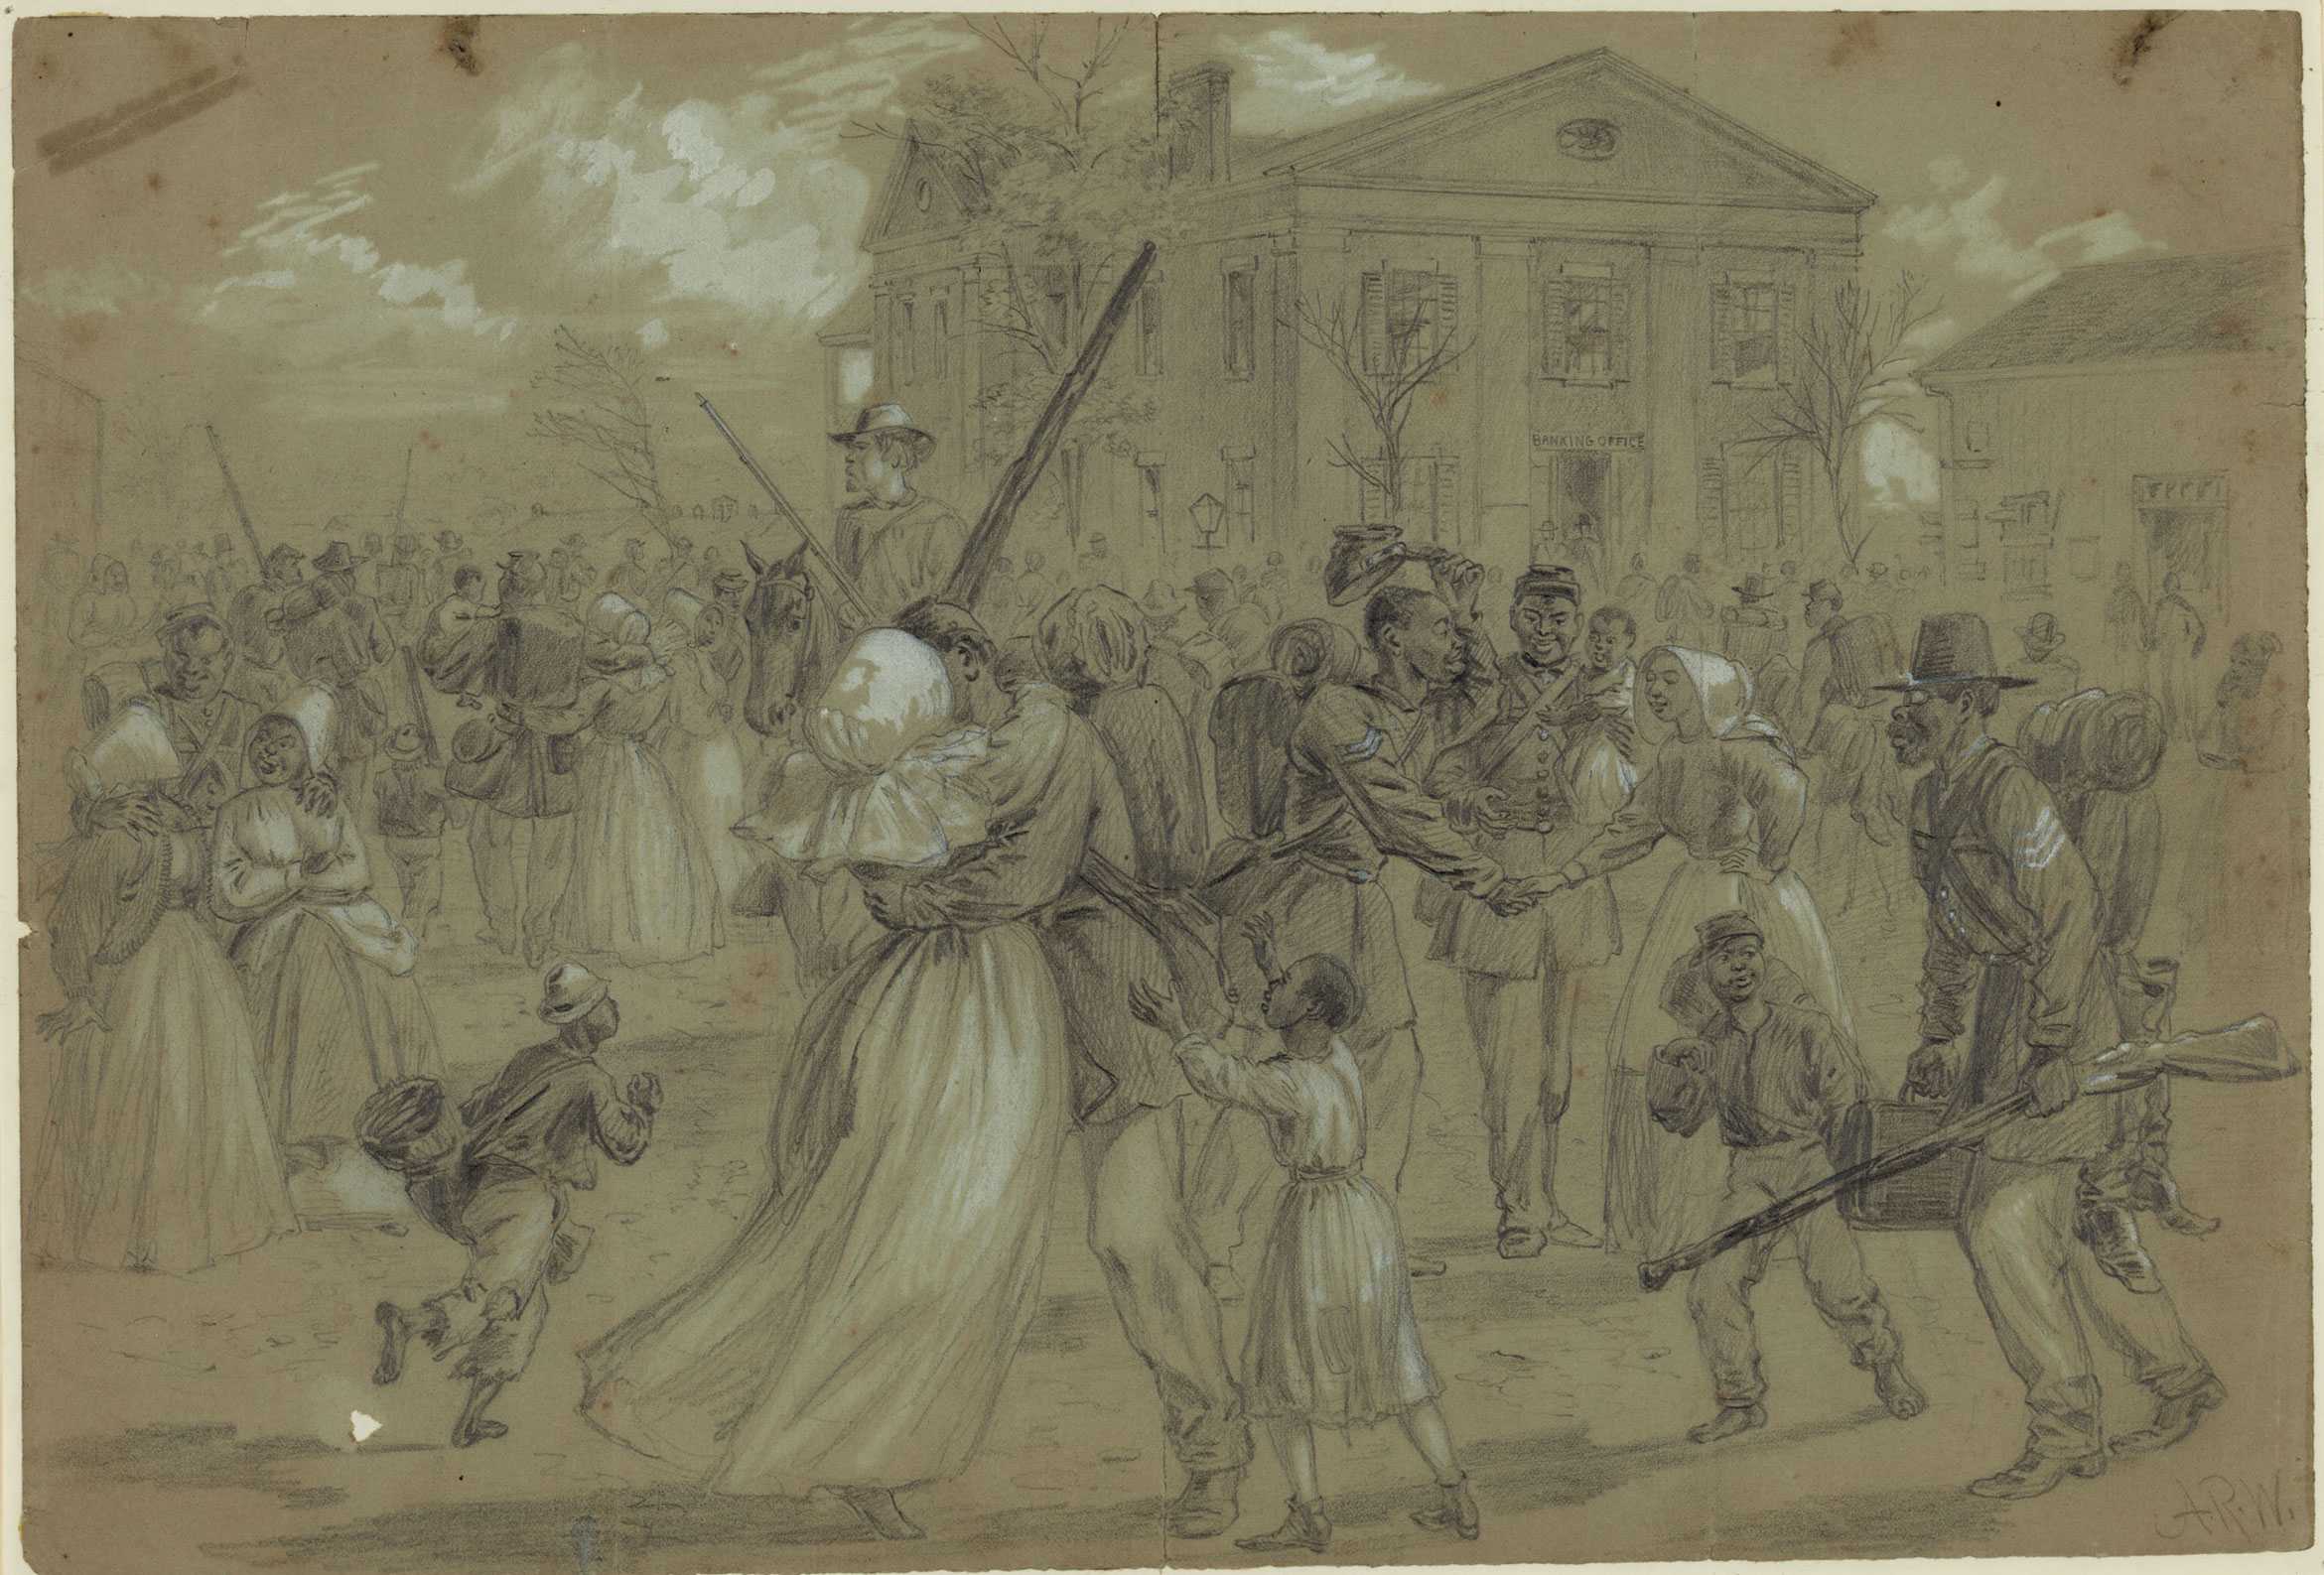 A drawing of African American soldiers celebrating. One soldier is kissing a woman.